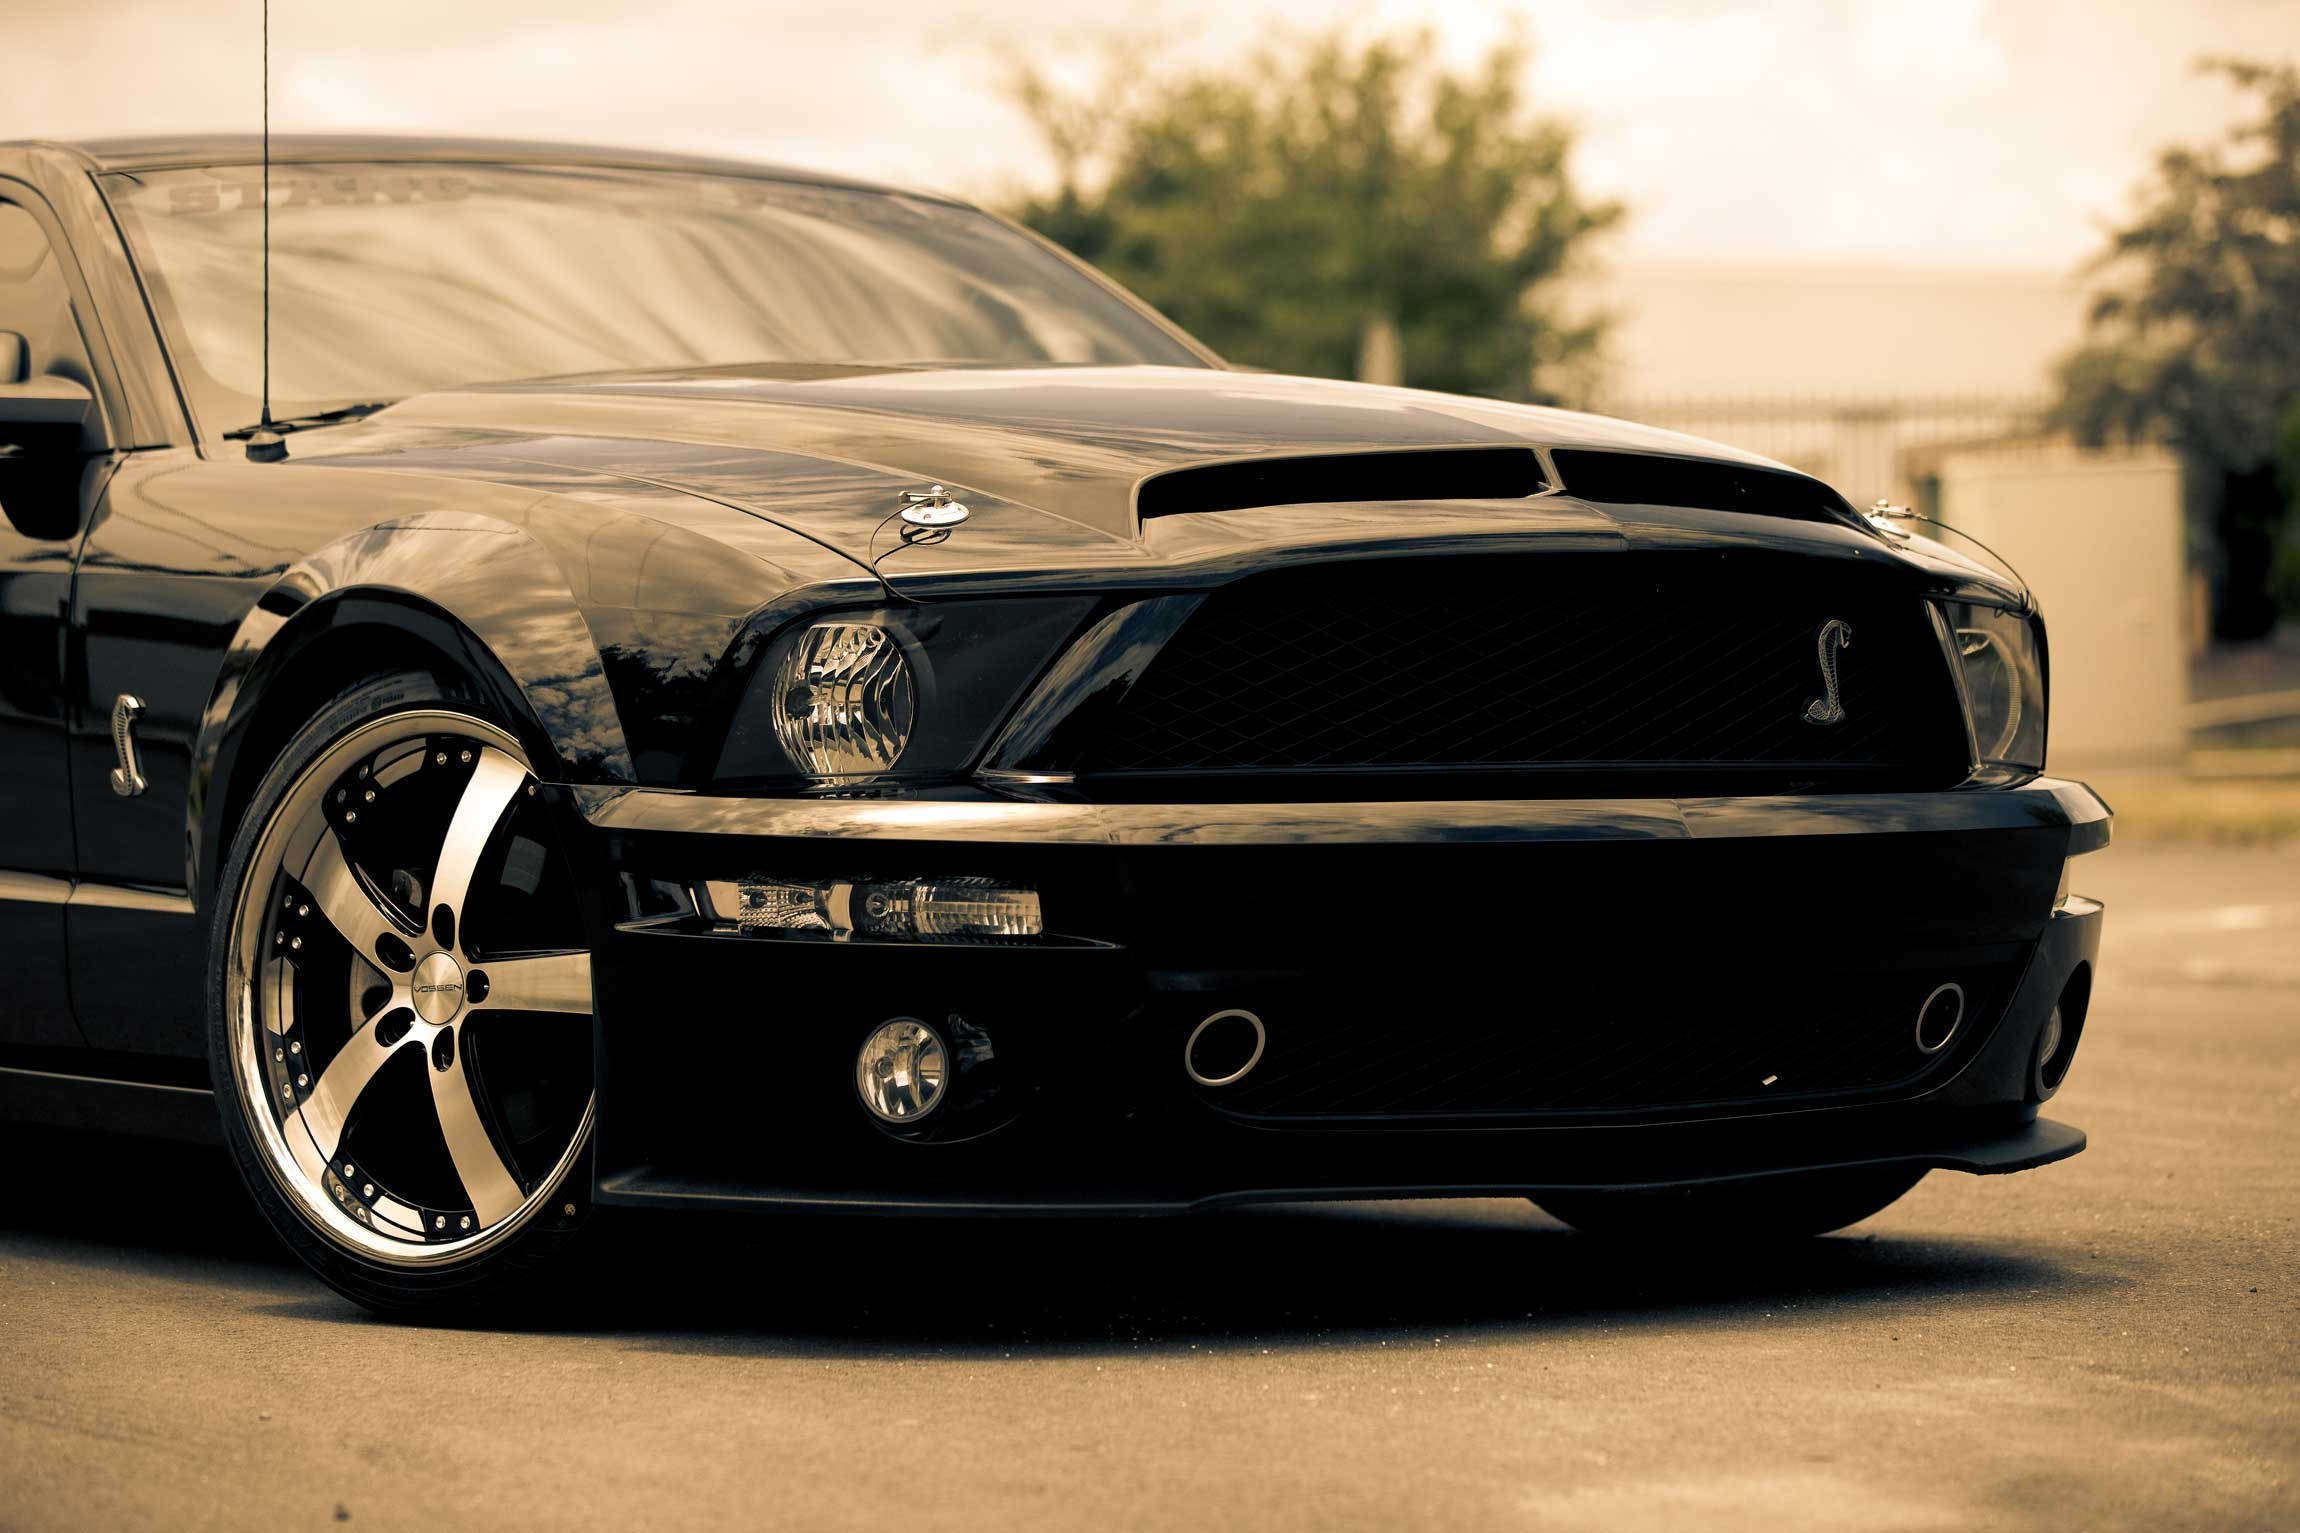 Car Muscle Cars Ford Mustang Gt Ford Mustang Wallpapers - Ford Mustang Wallpapers Hd - HD Wallpaper 